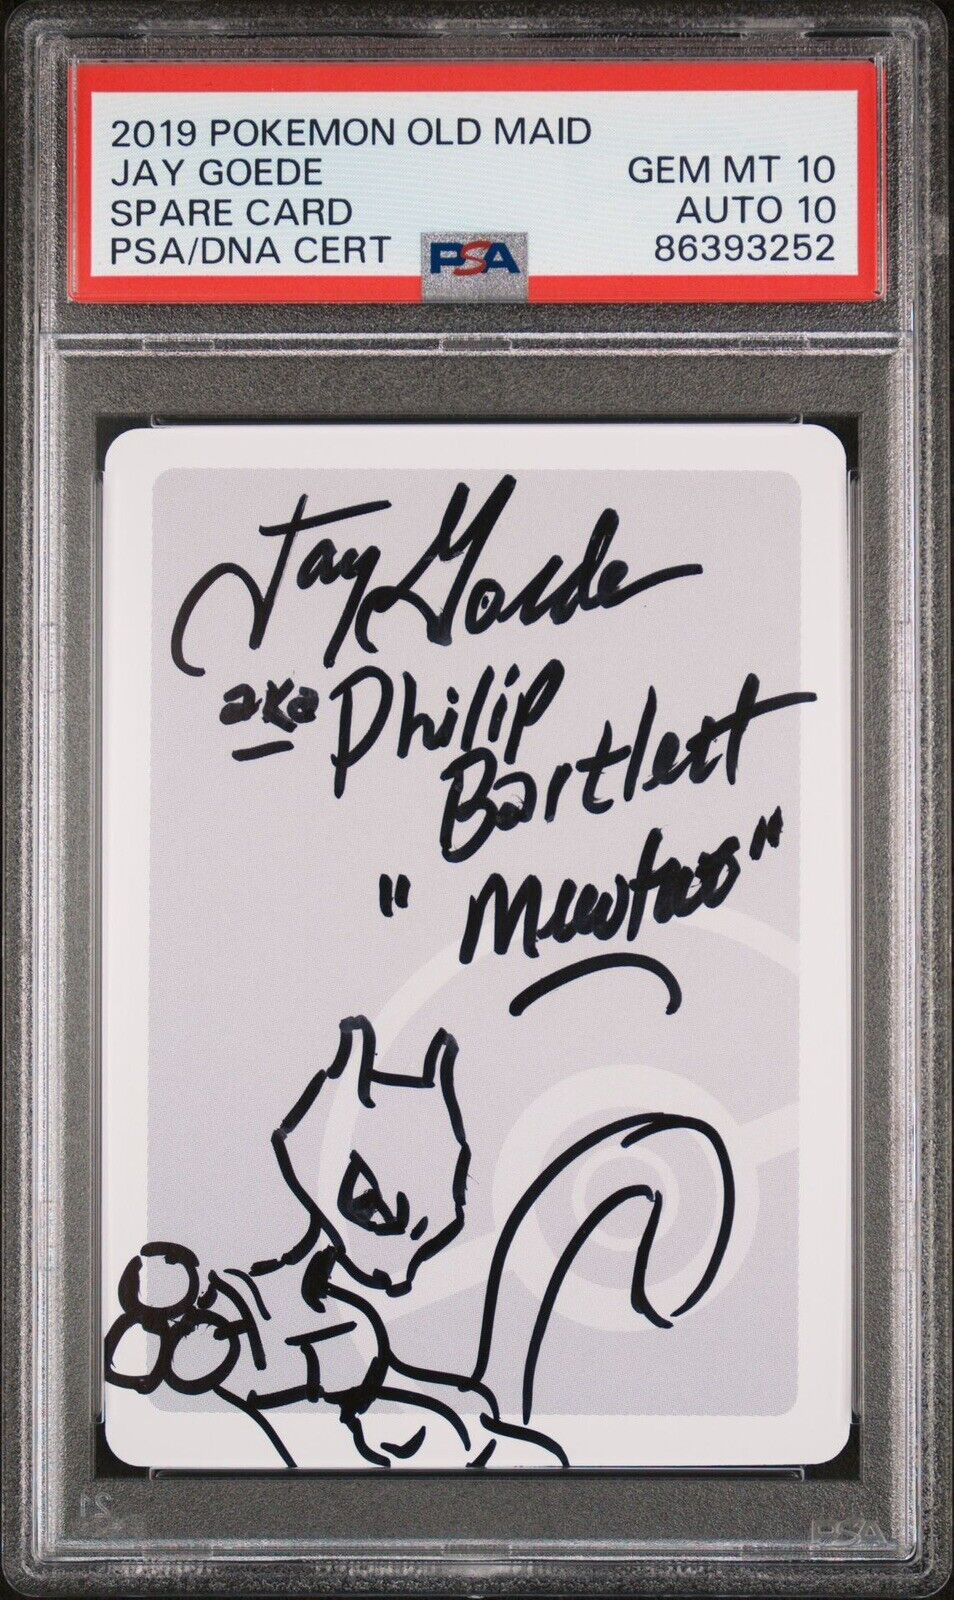 2019 Pokemon Old Maid Japanese Spare Card MEWTWO SIGNED AUTO 10 JAY GOEDE PSA 10